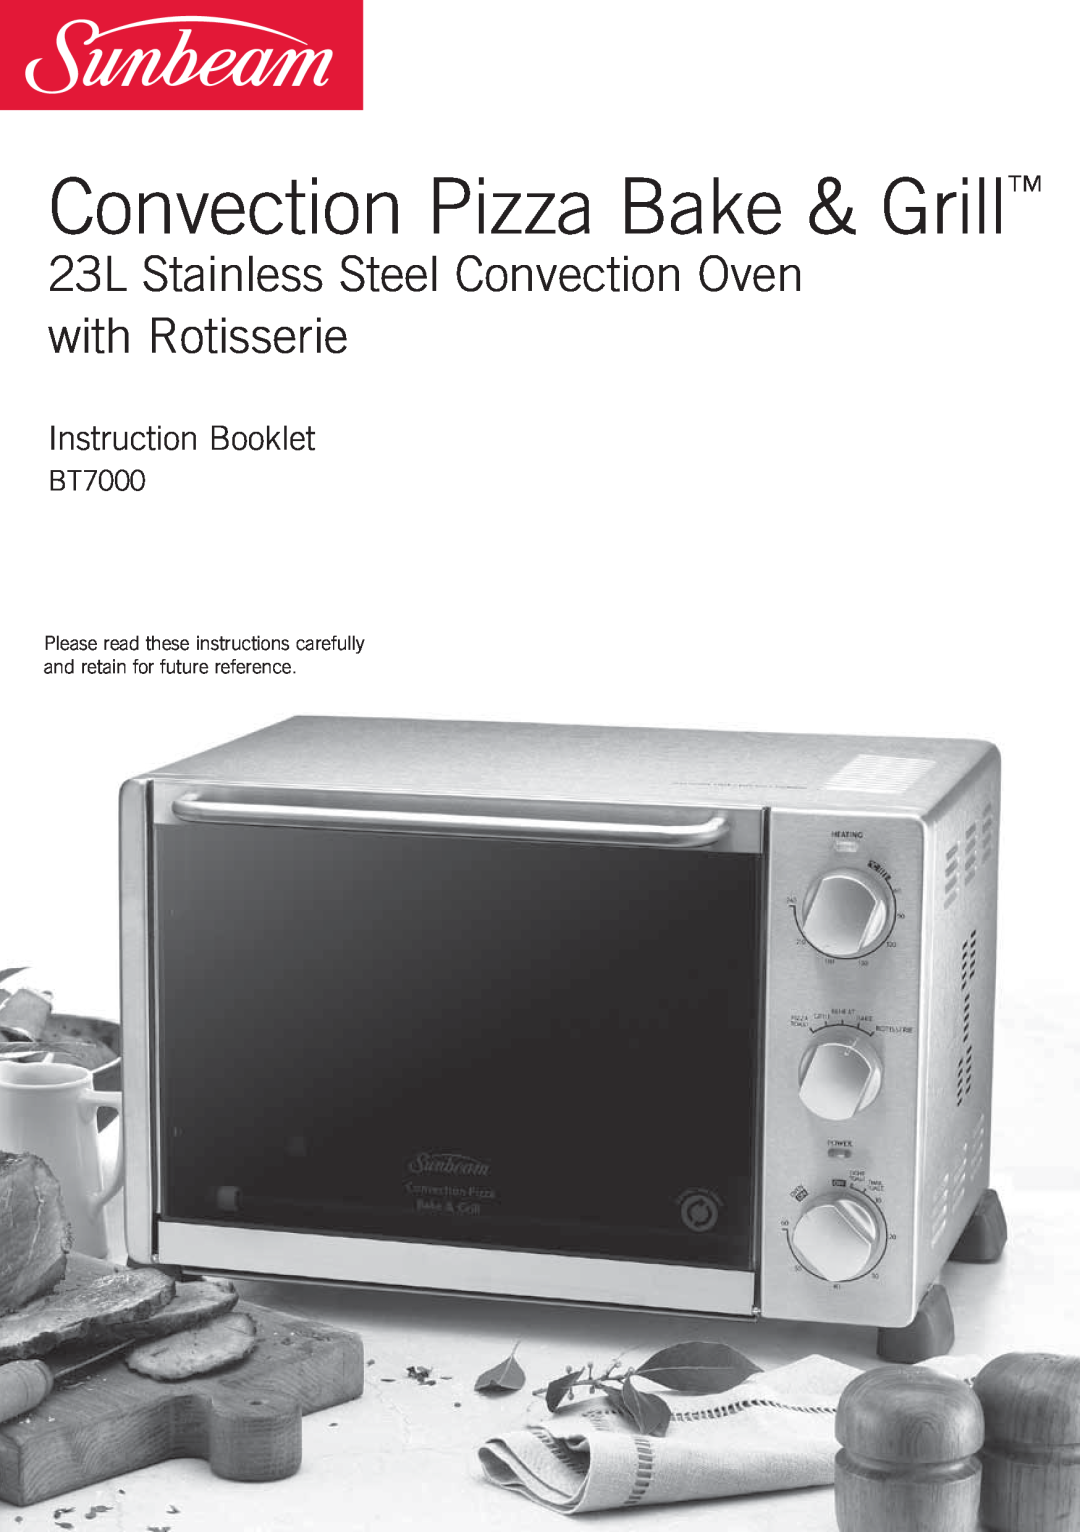 Sunbeam BT7000 manual Convection Pizza Bake & Grill, 23L Stainless Steel Convection Oven with Rotisserie 